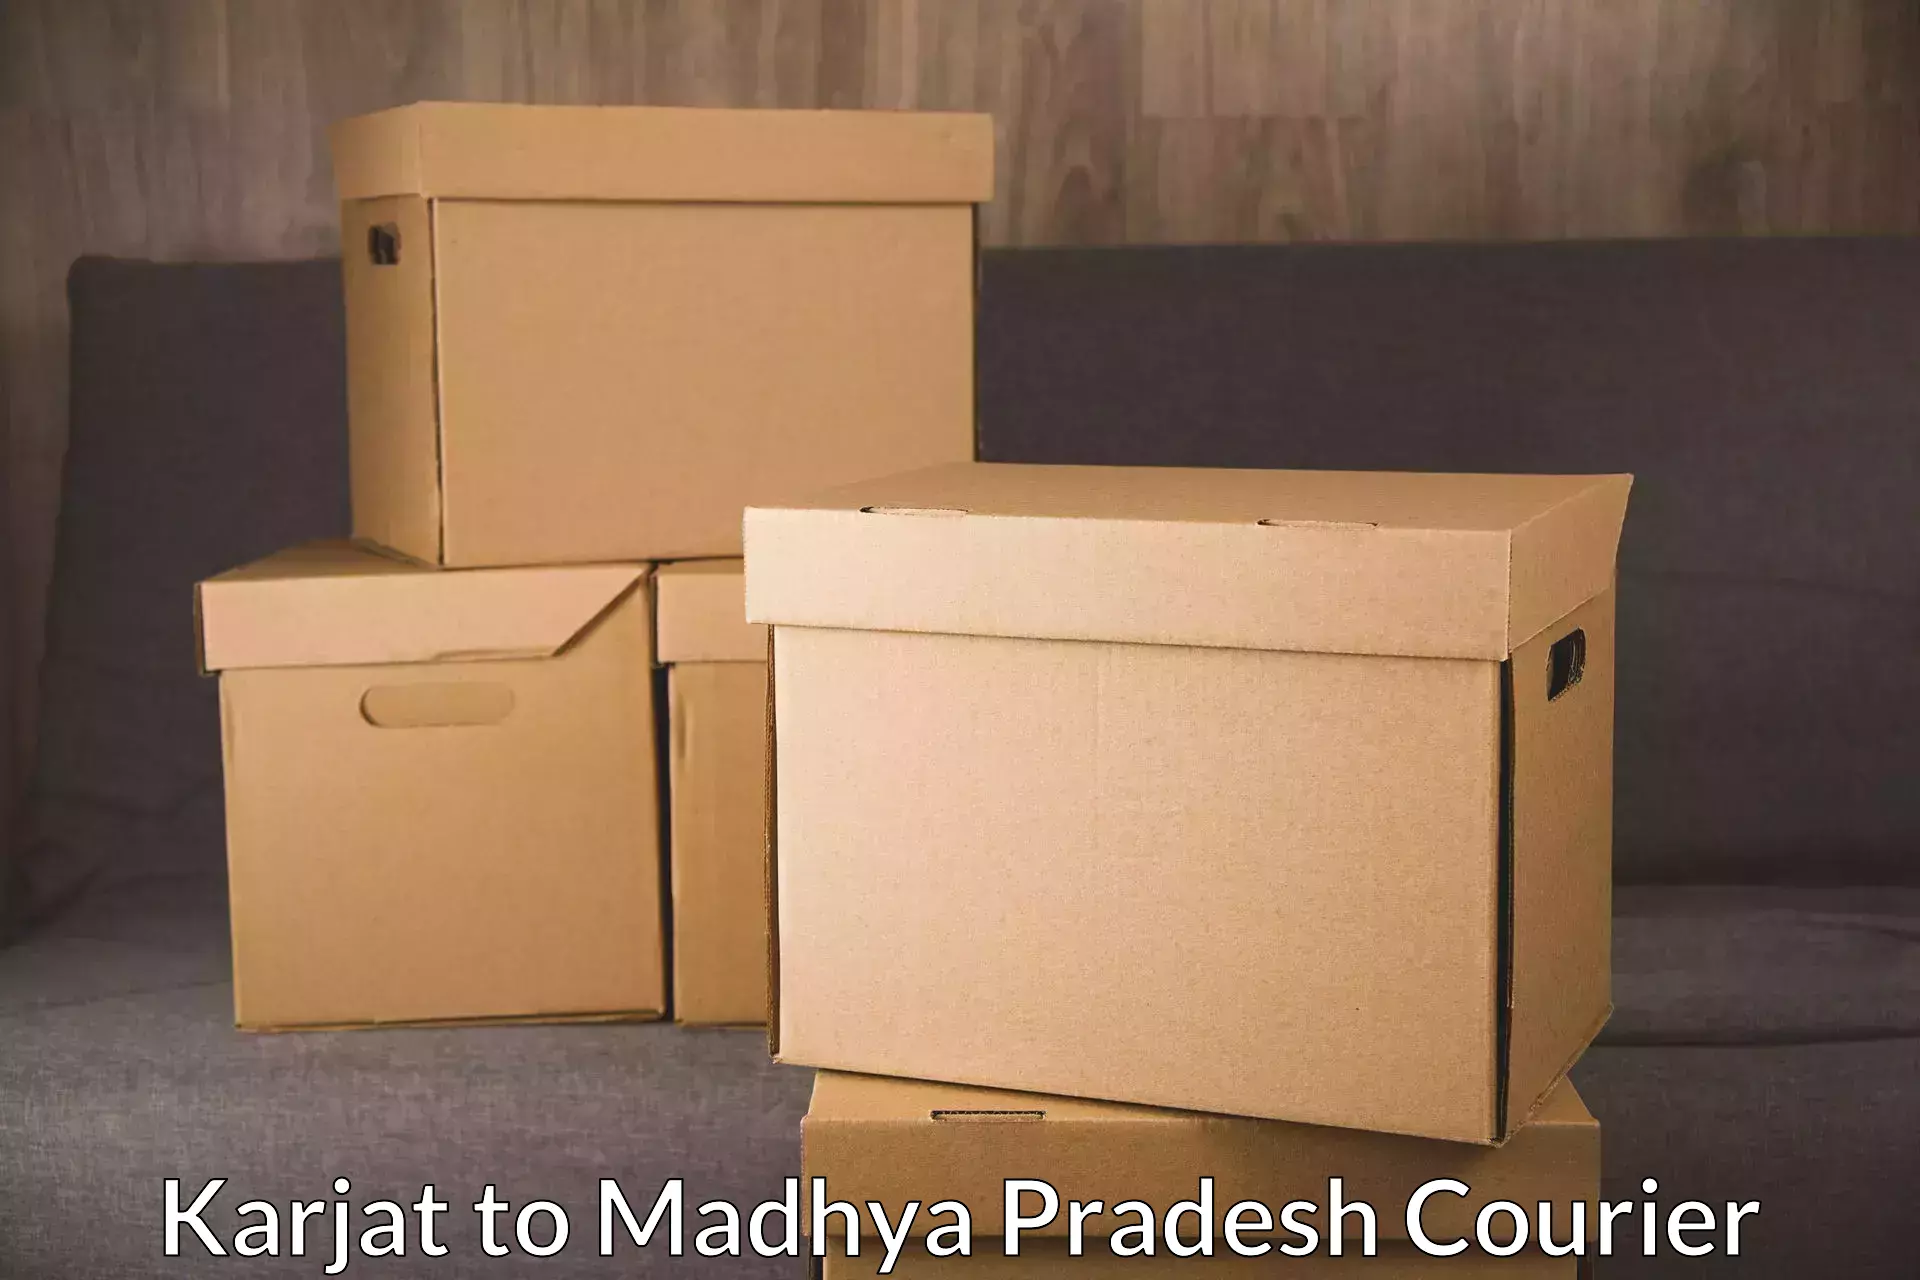 Reliable courier service Karjat to Gwalior